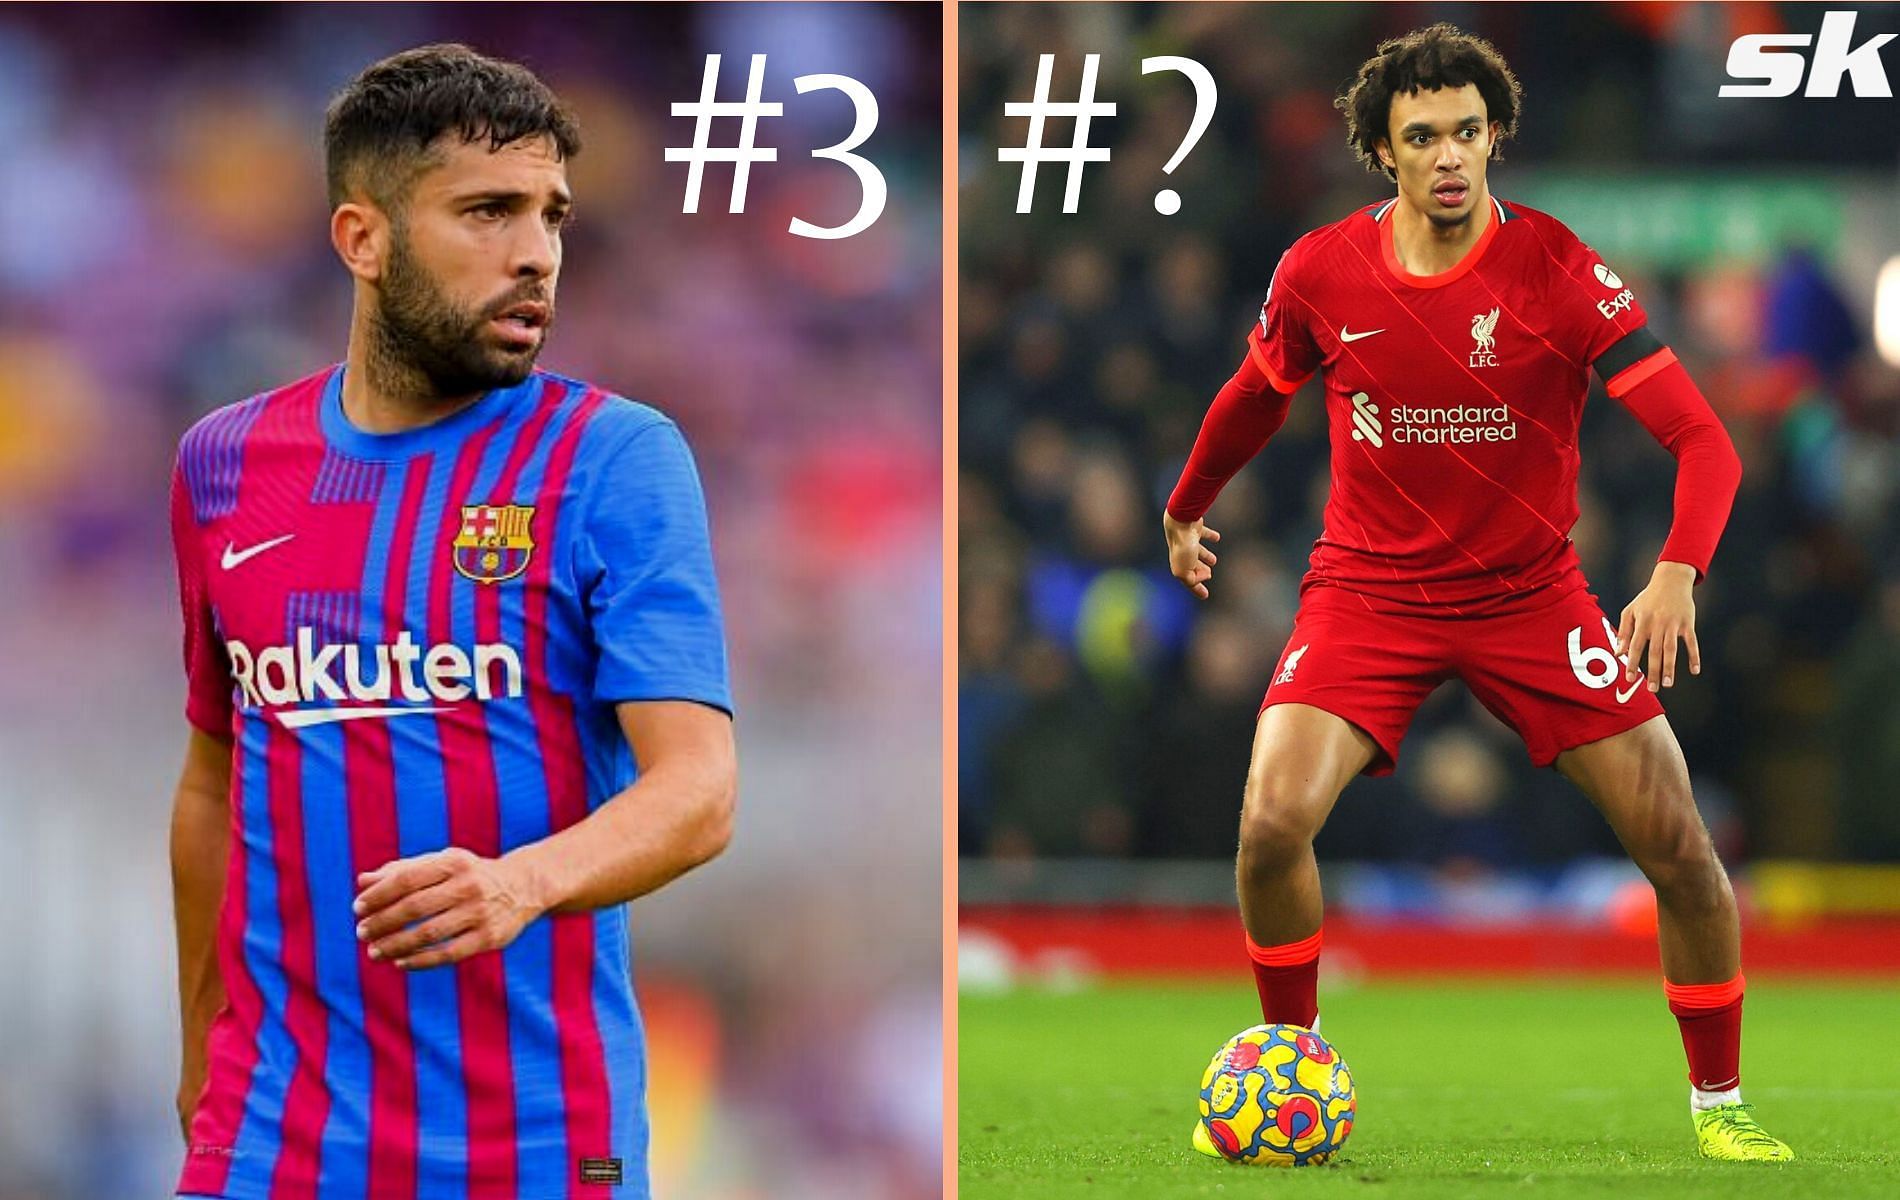 Top clubs have seen their full-backs contribute heavily in attack.